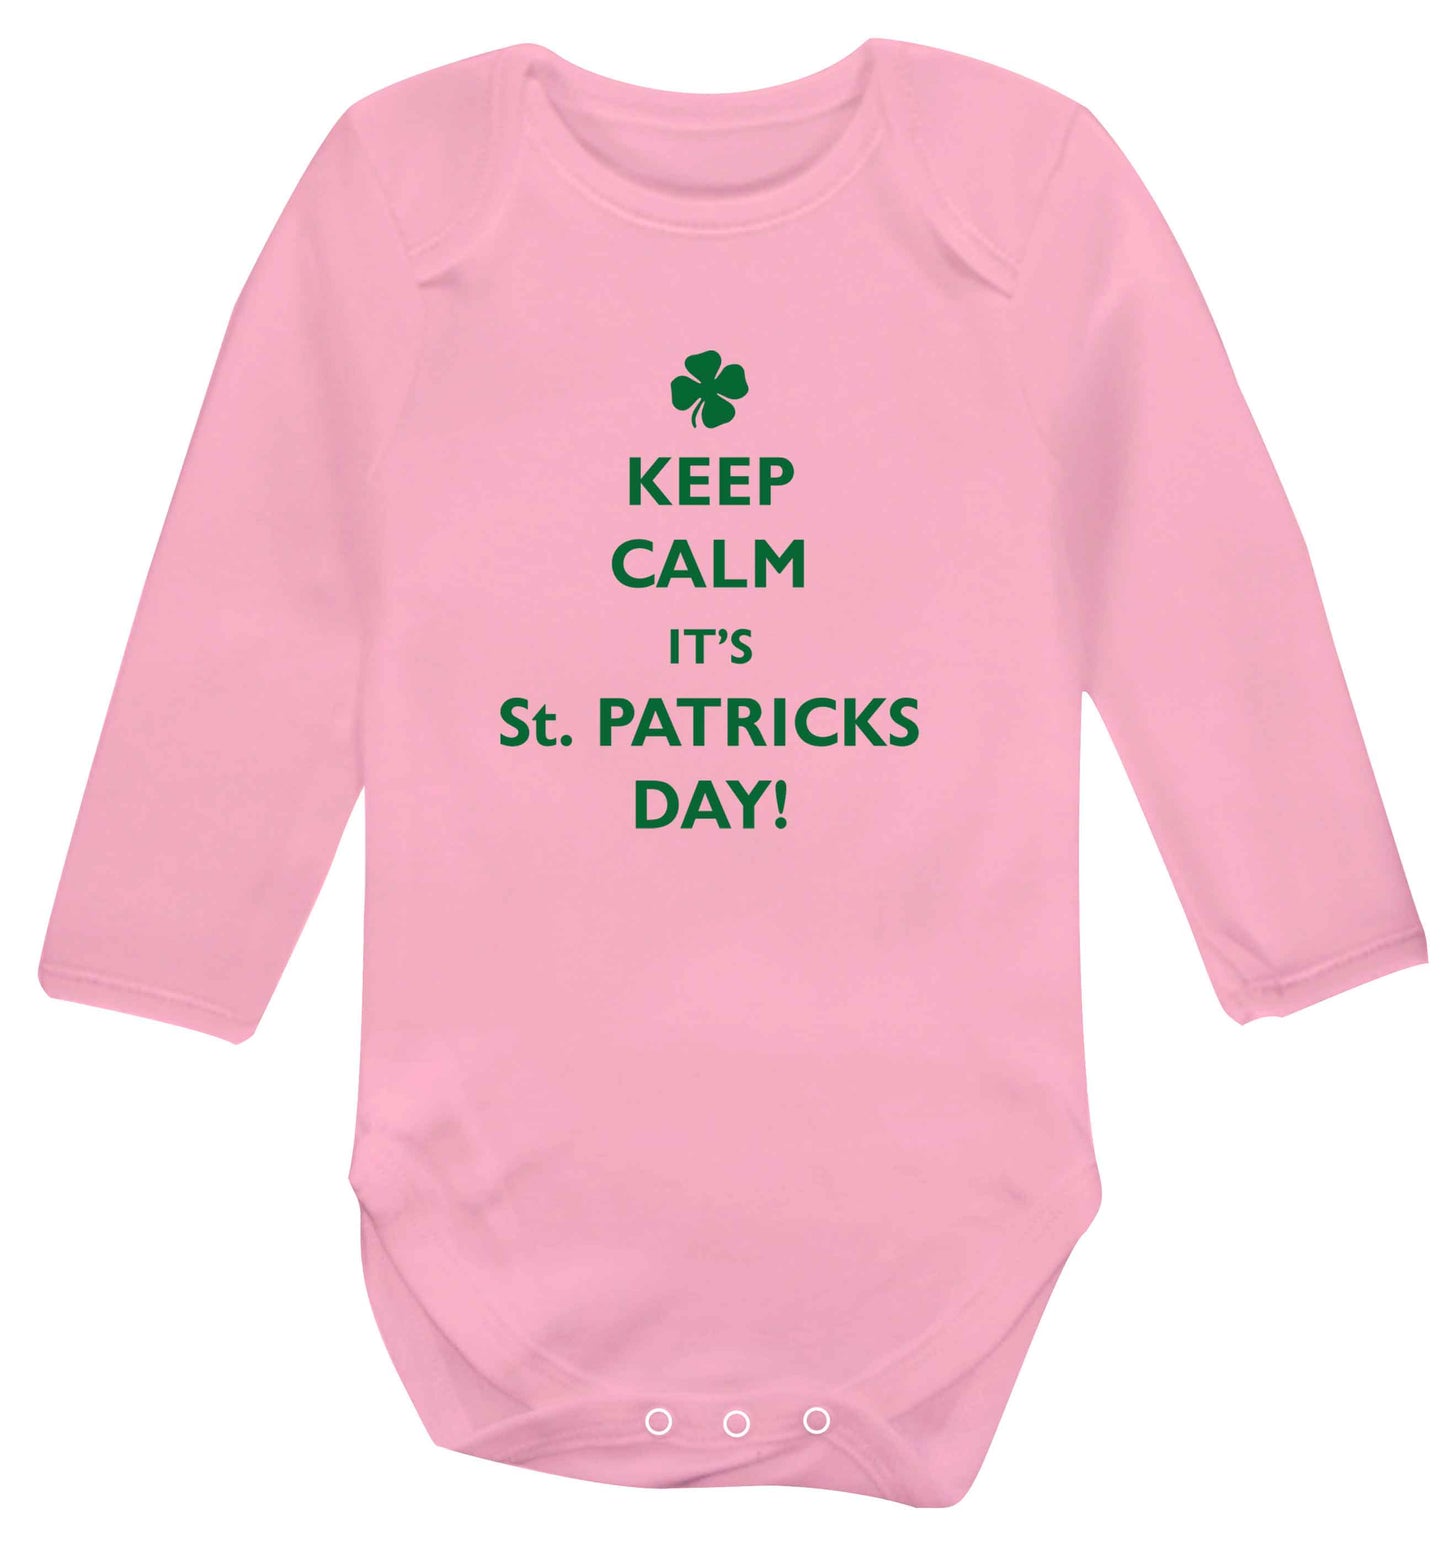 I can't keep calm it's St.Patricks day baby vest long sleeved pale pink 6-12 months